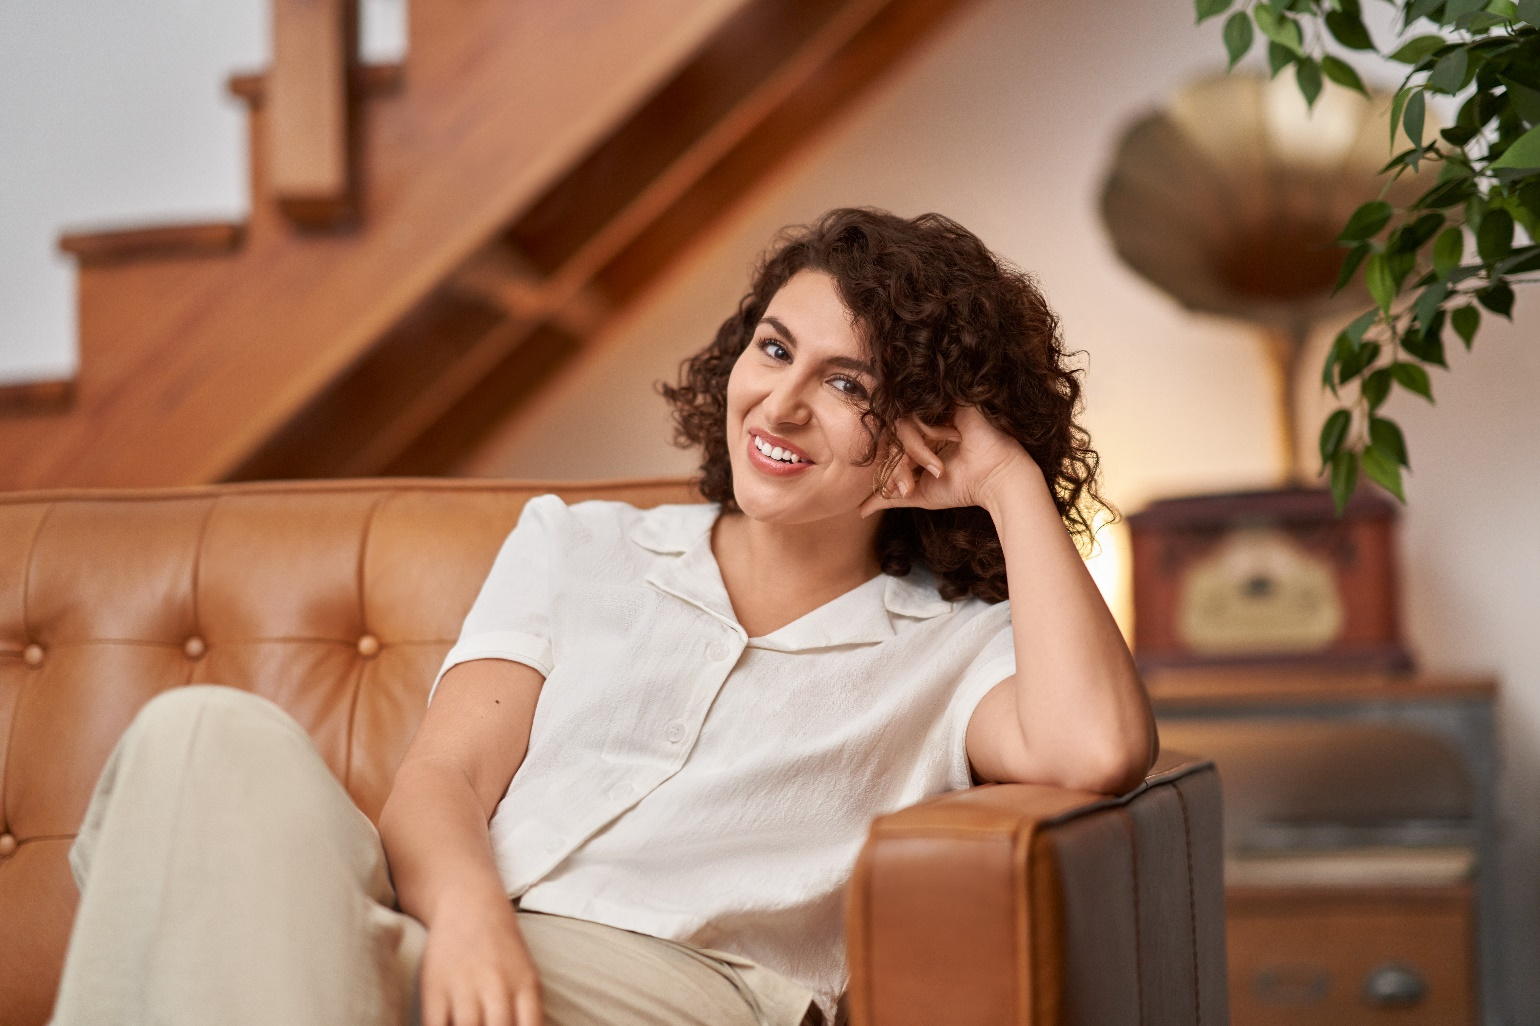 A photograph of a woman smiling sitting on couch.